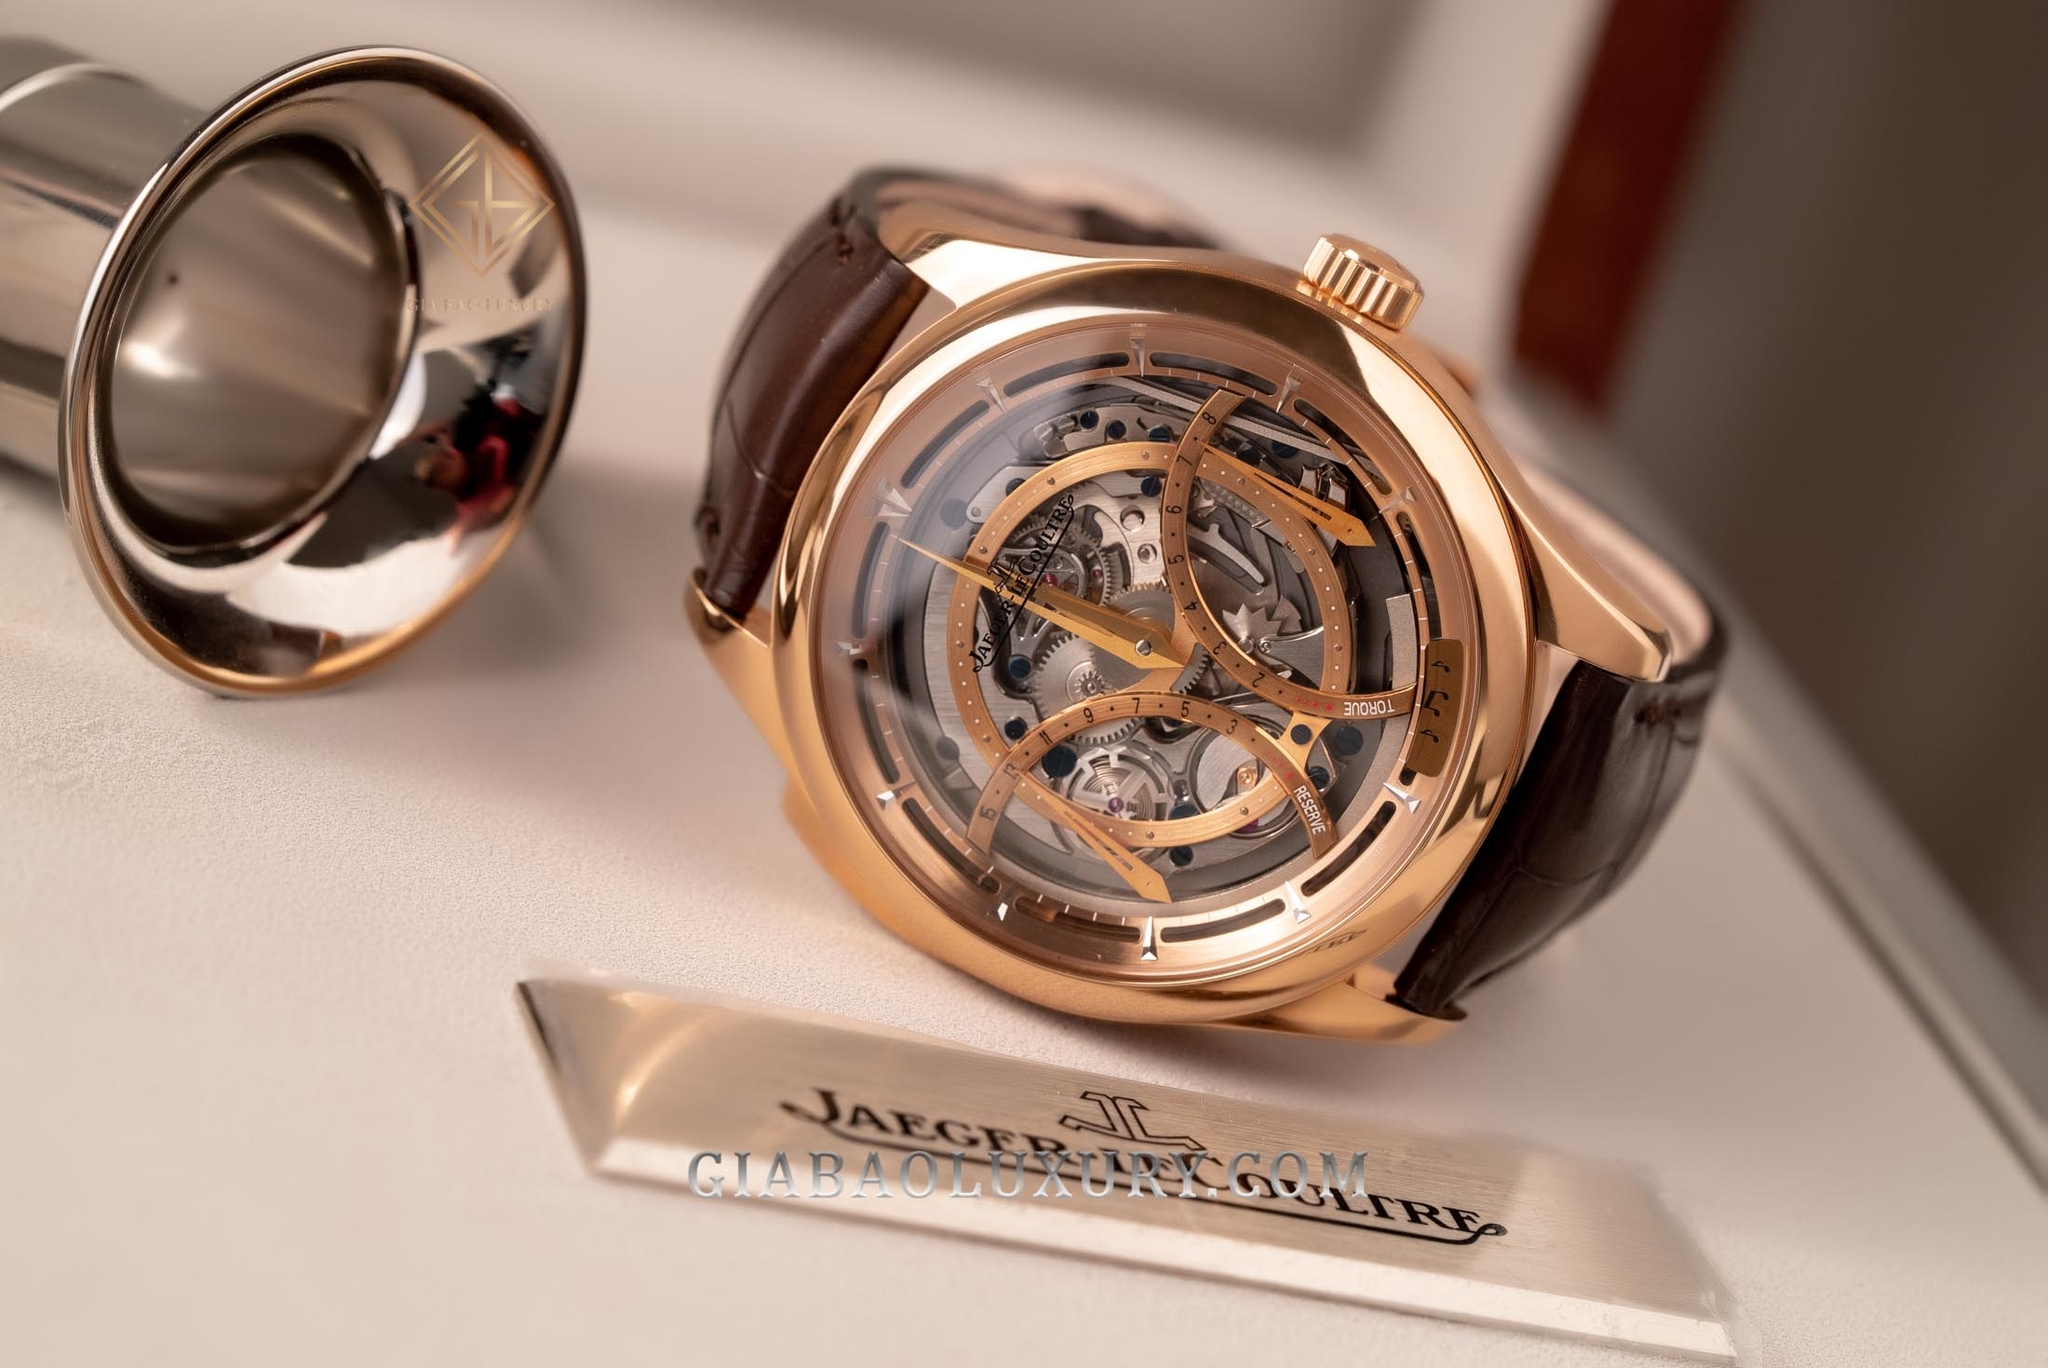 Đồng hồ Jaeger LeCoultre Grande Tradition Minute Repeater Q5012550